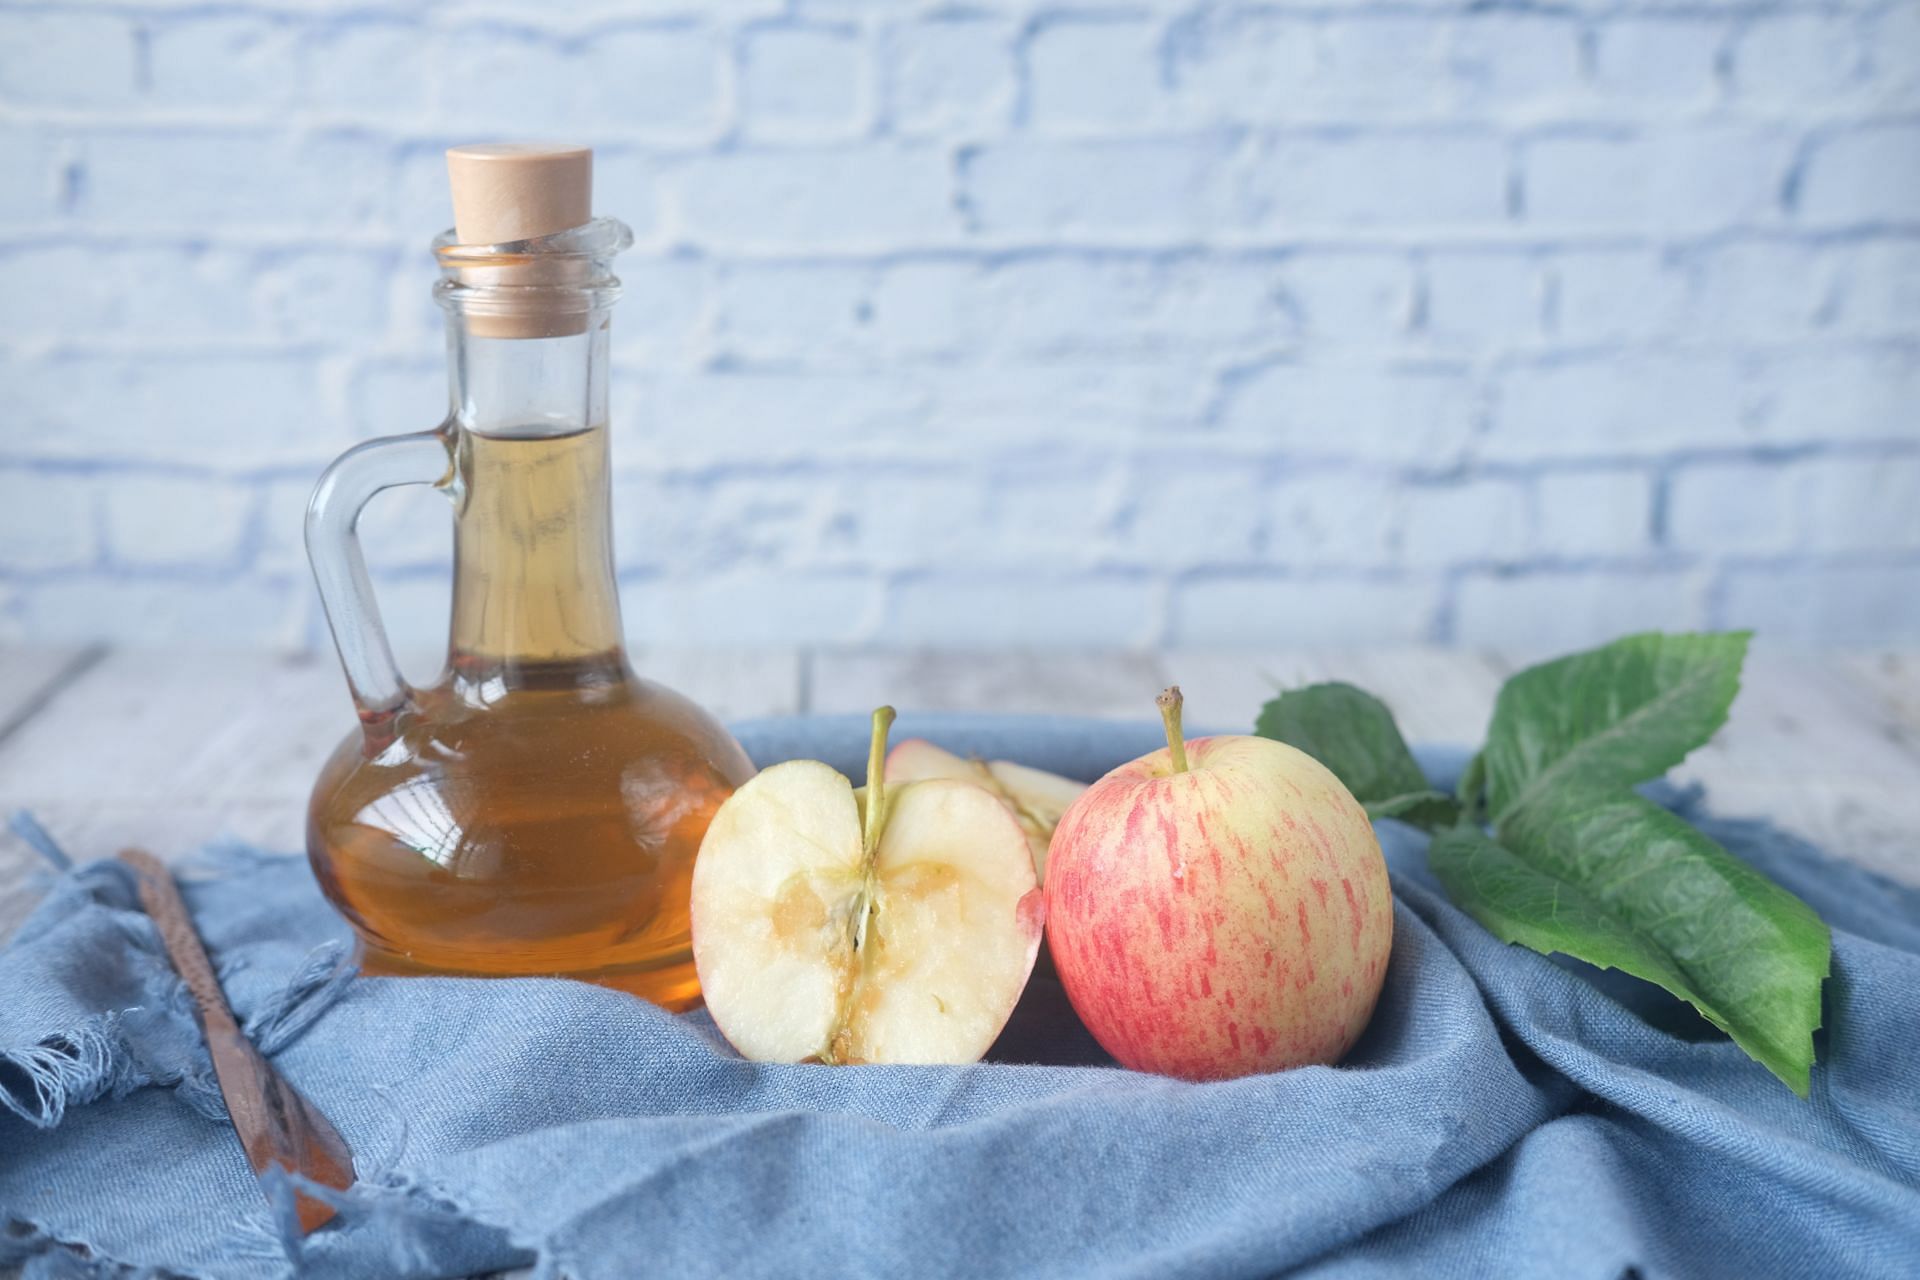 Is adding apple cider vinegar to your diet a good idea for losing weight? (Image by Towfiqu barbhuiya/Unsplash)